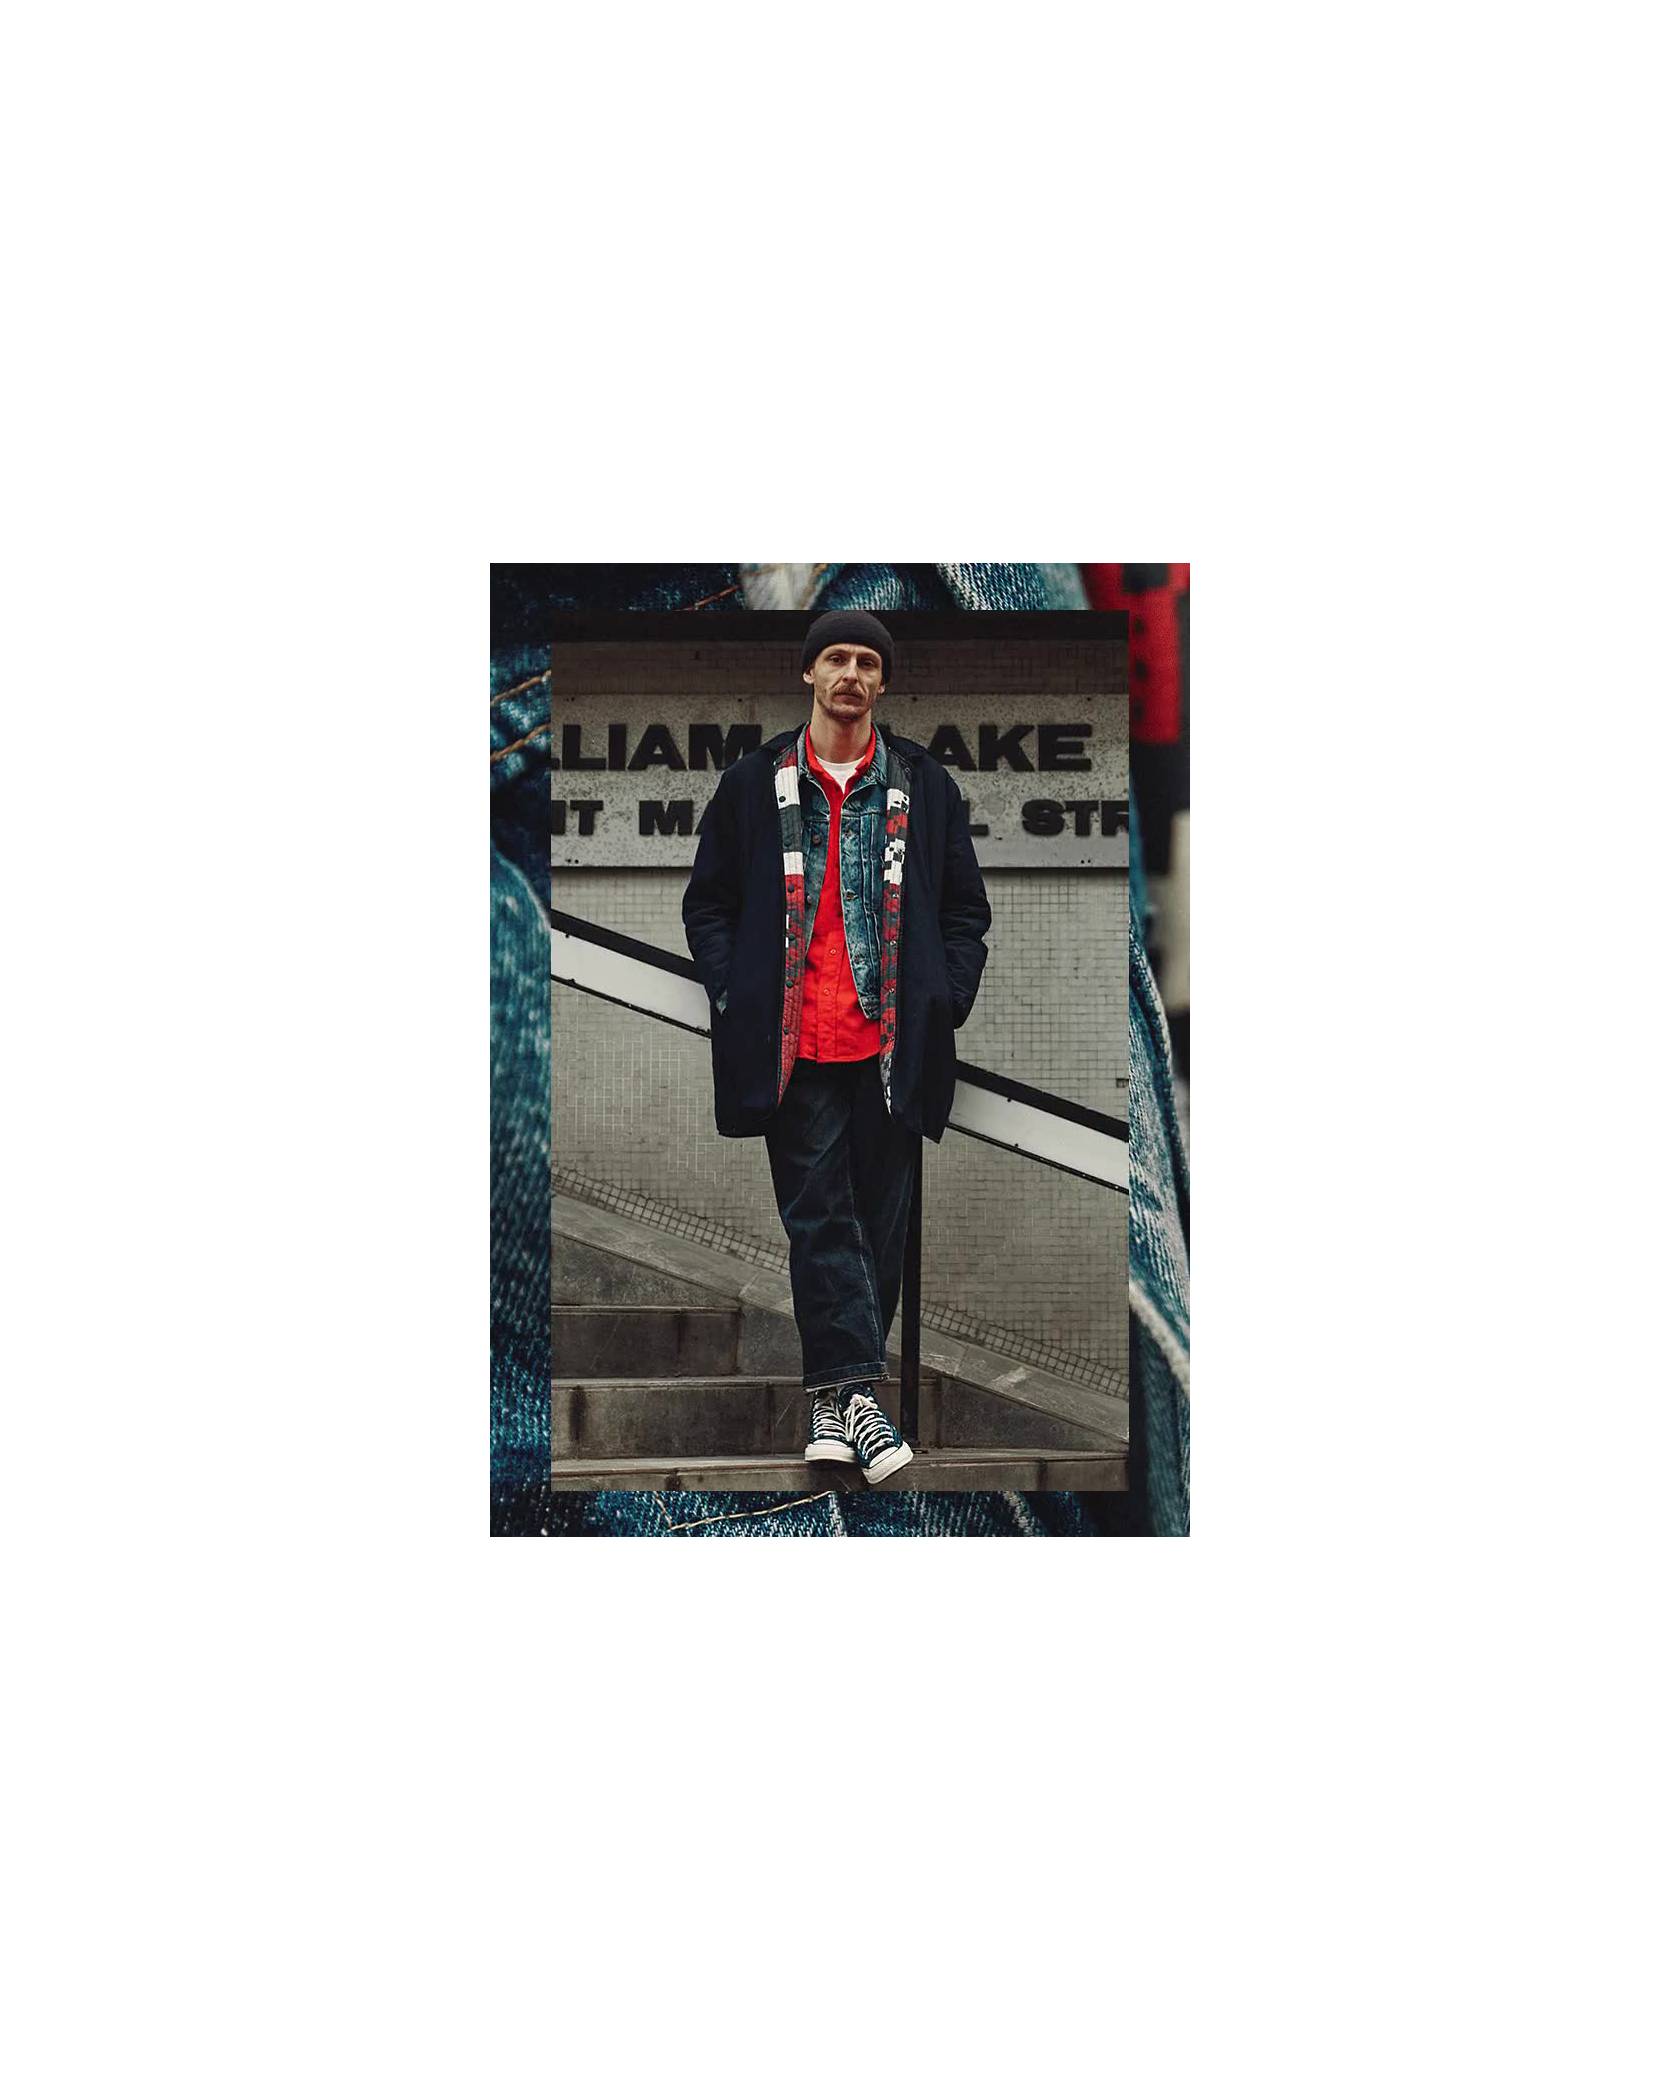 GIFs of Christopher Dalglish's outfits.